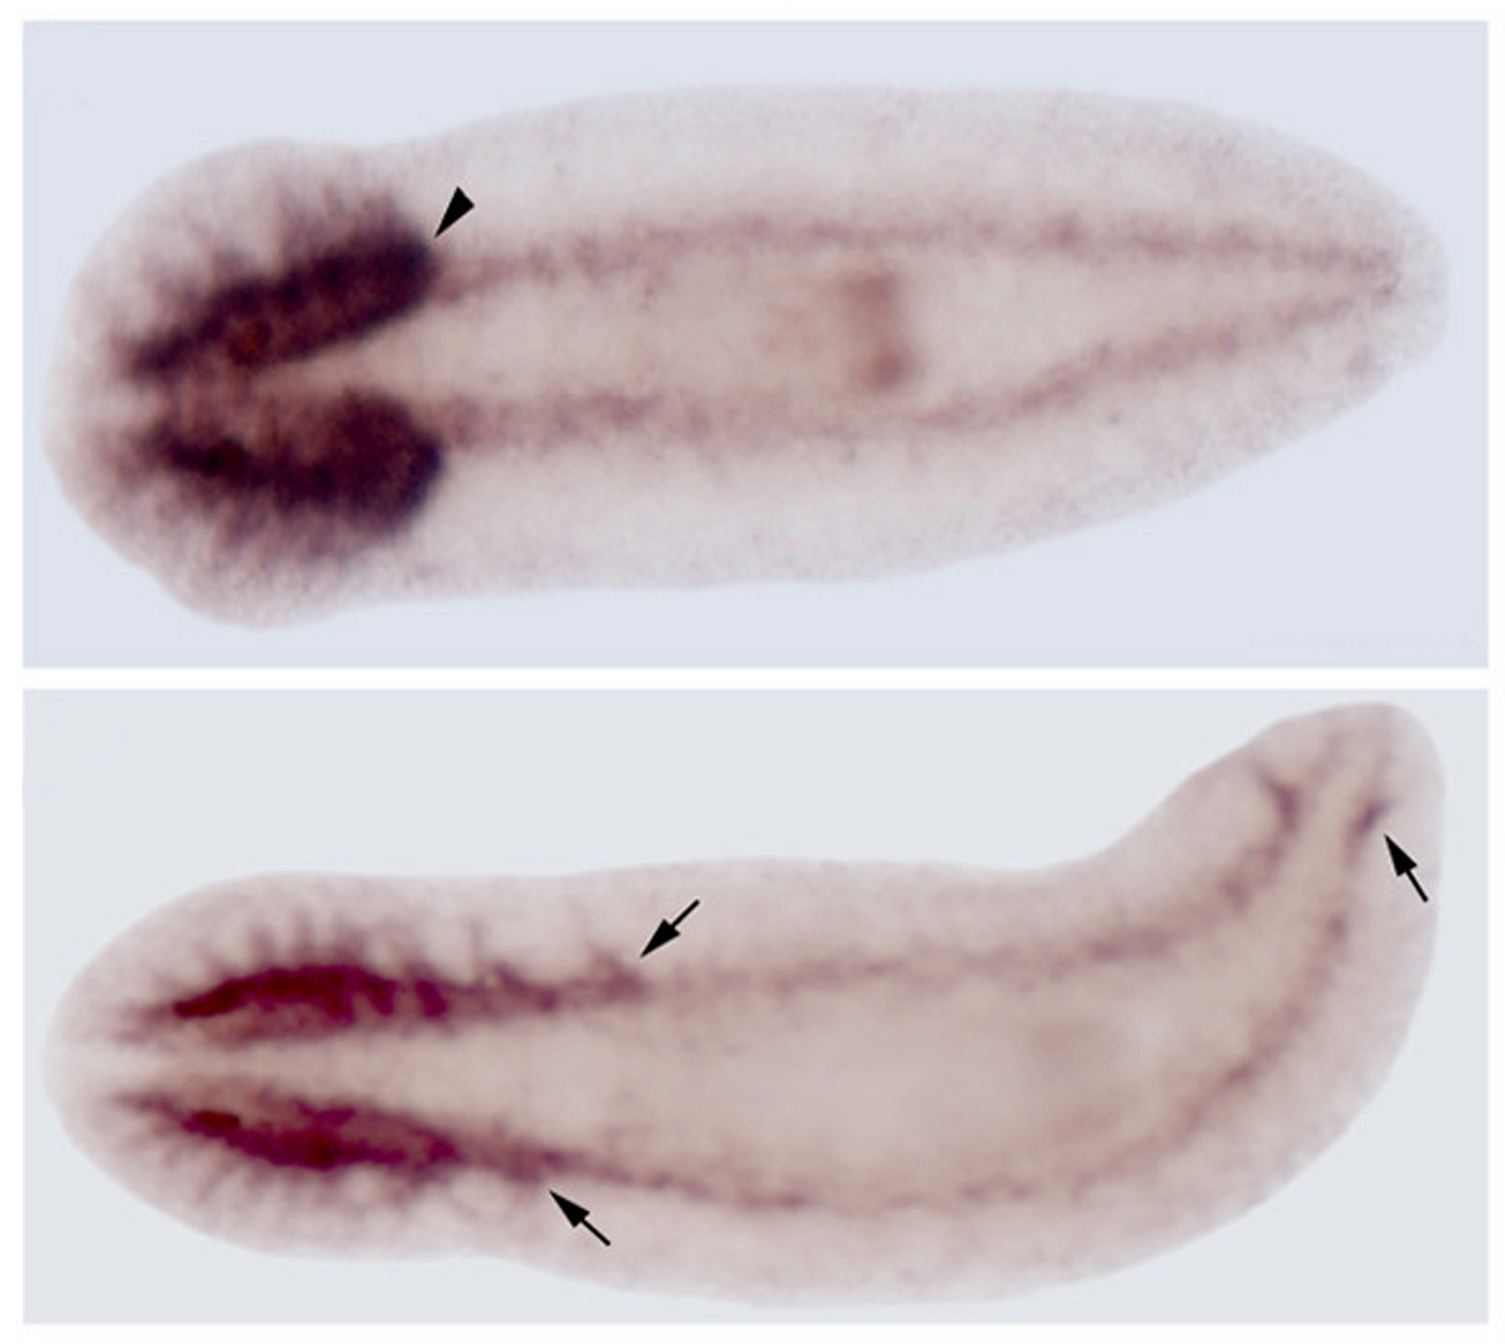 A normal flatworm has a U-shaped brain restricted to its head (top photo above). But when a gene named "brains everywhere" is deactivated, brain material develops father down the body and even in the tail (indicated by arrows in bottom photo above).